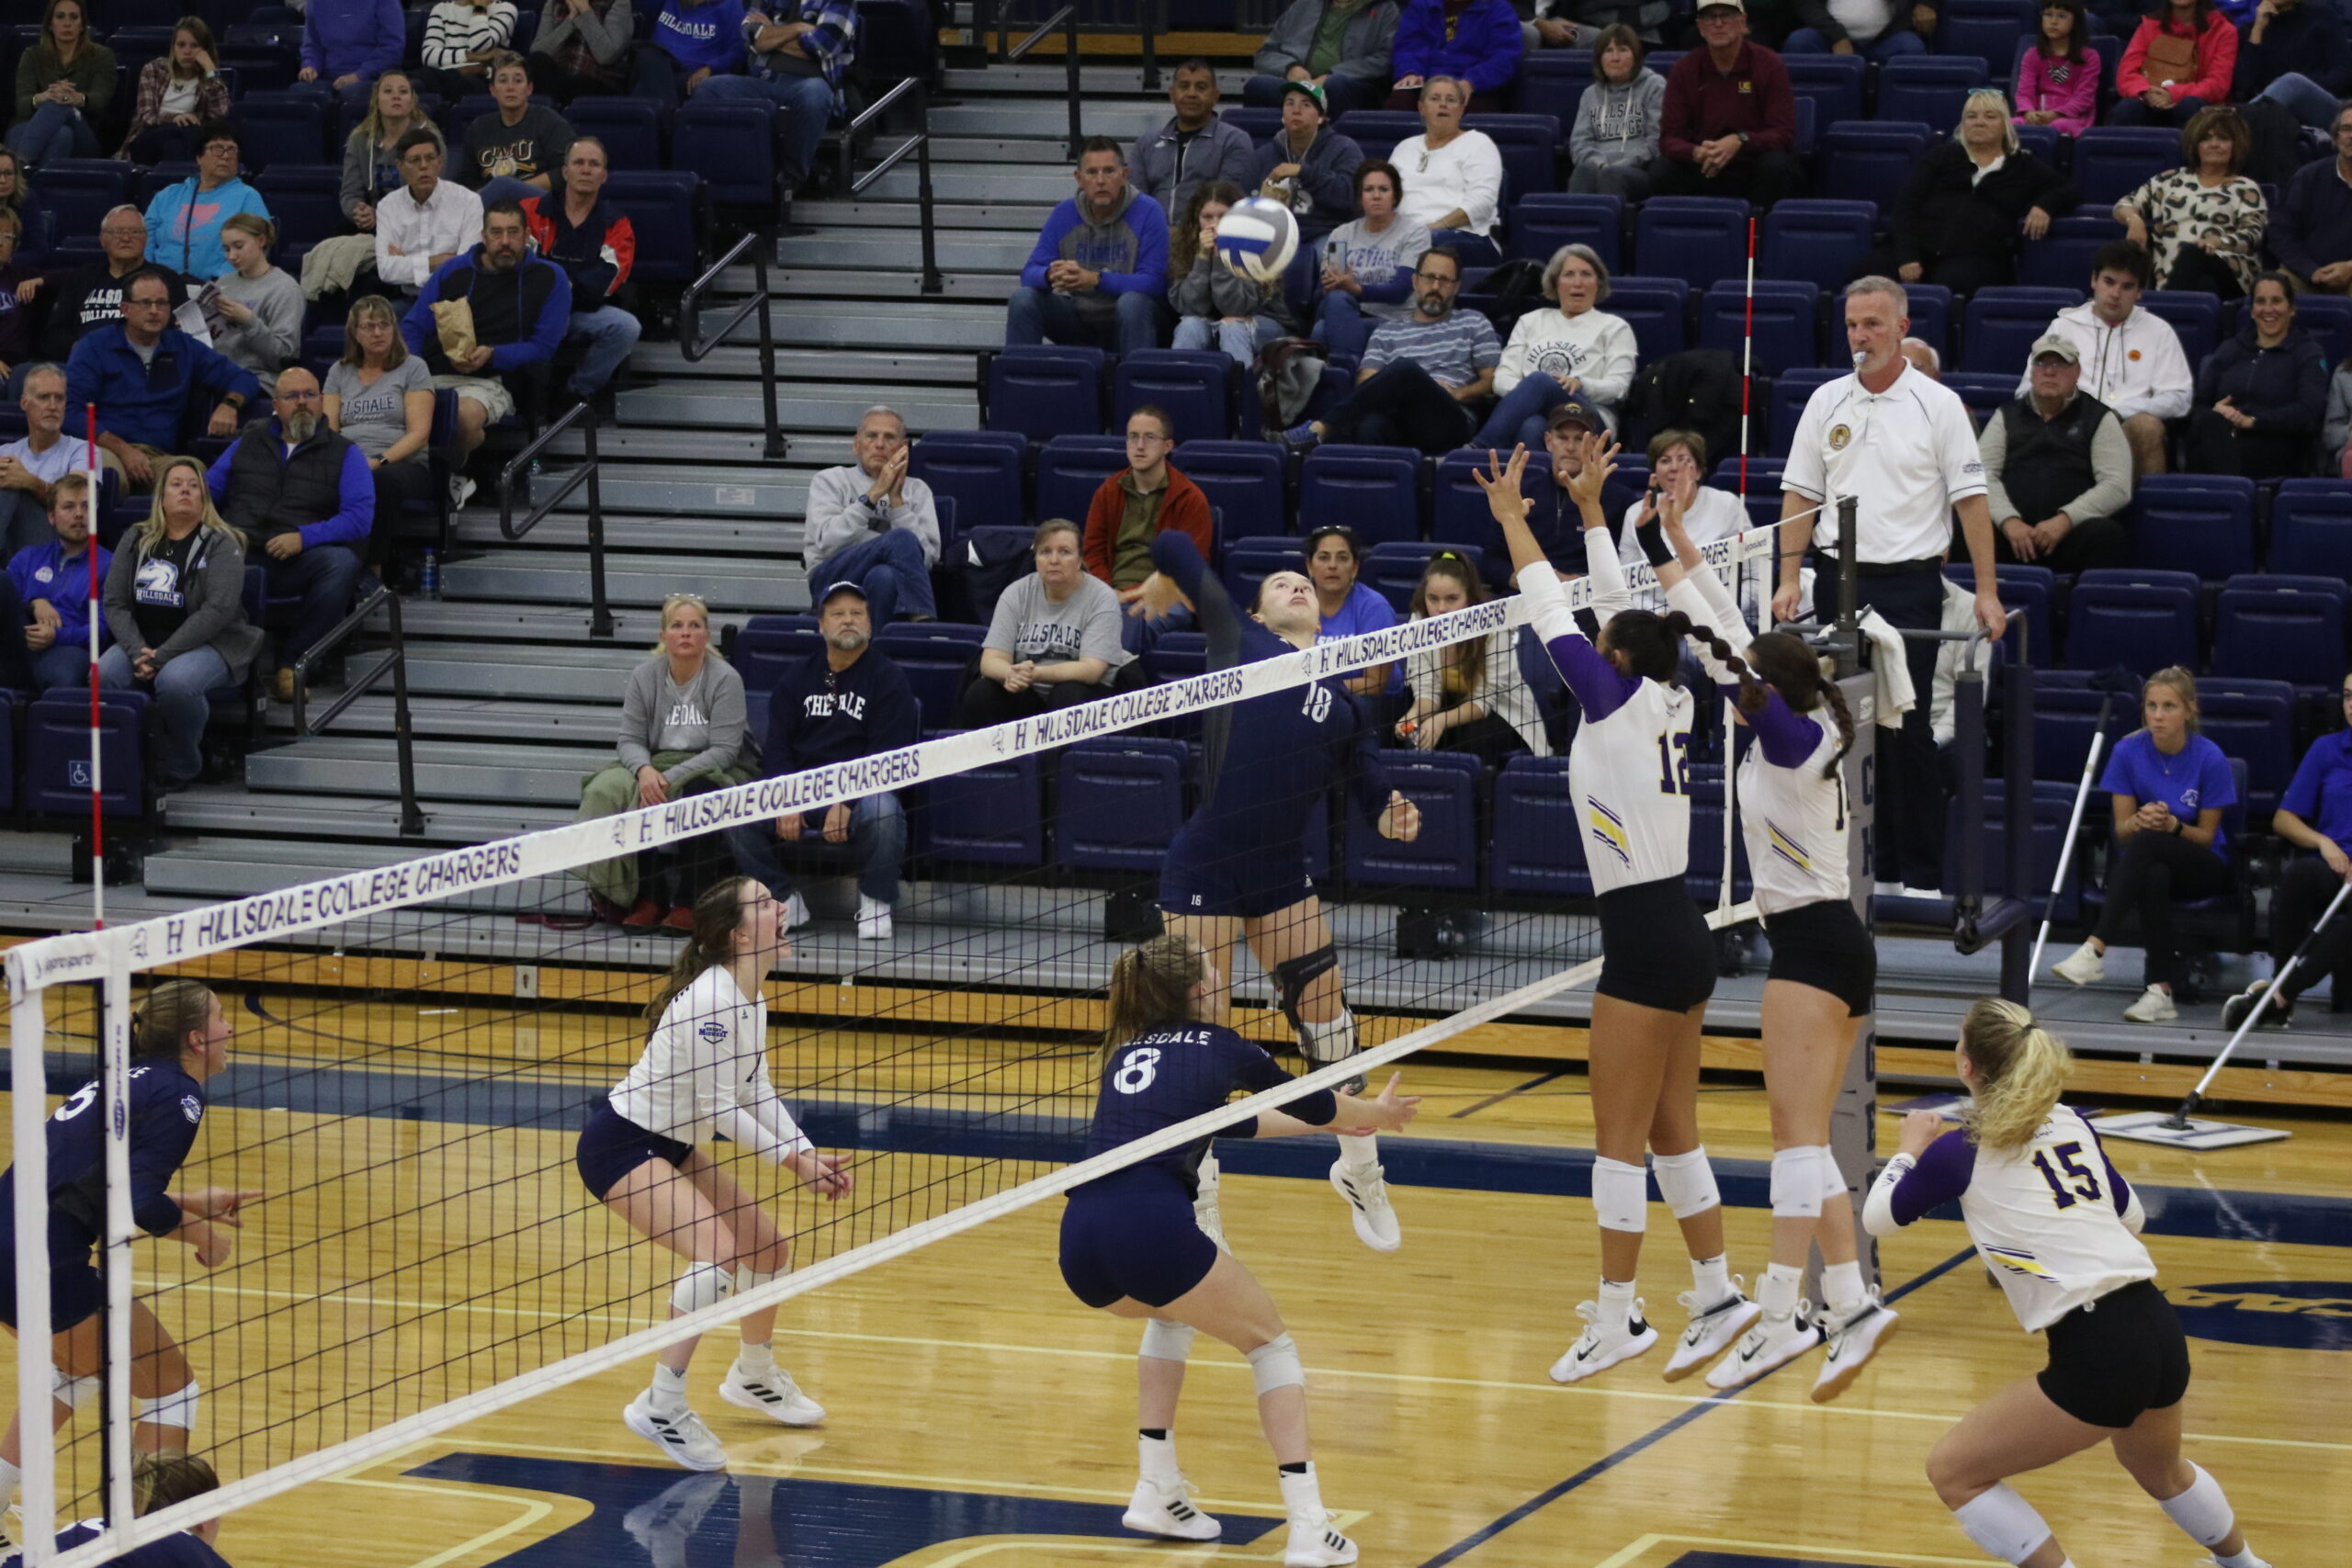 Volleyball goes 4-2, Mertz sets new all-time program mark for assists